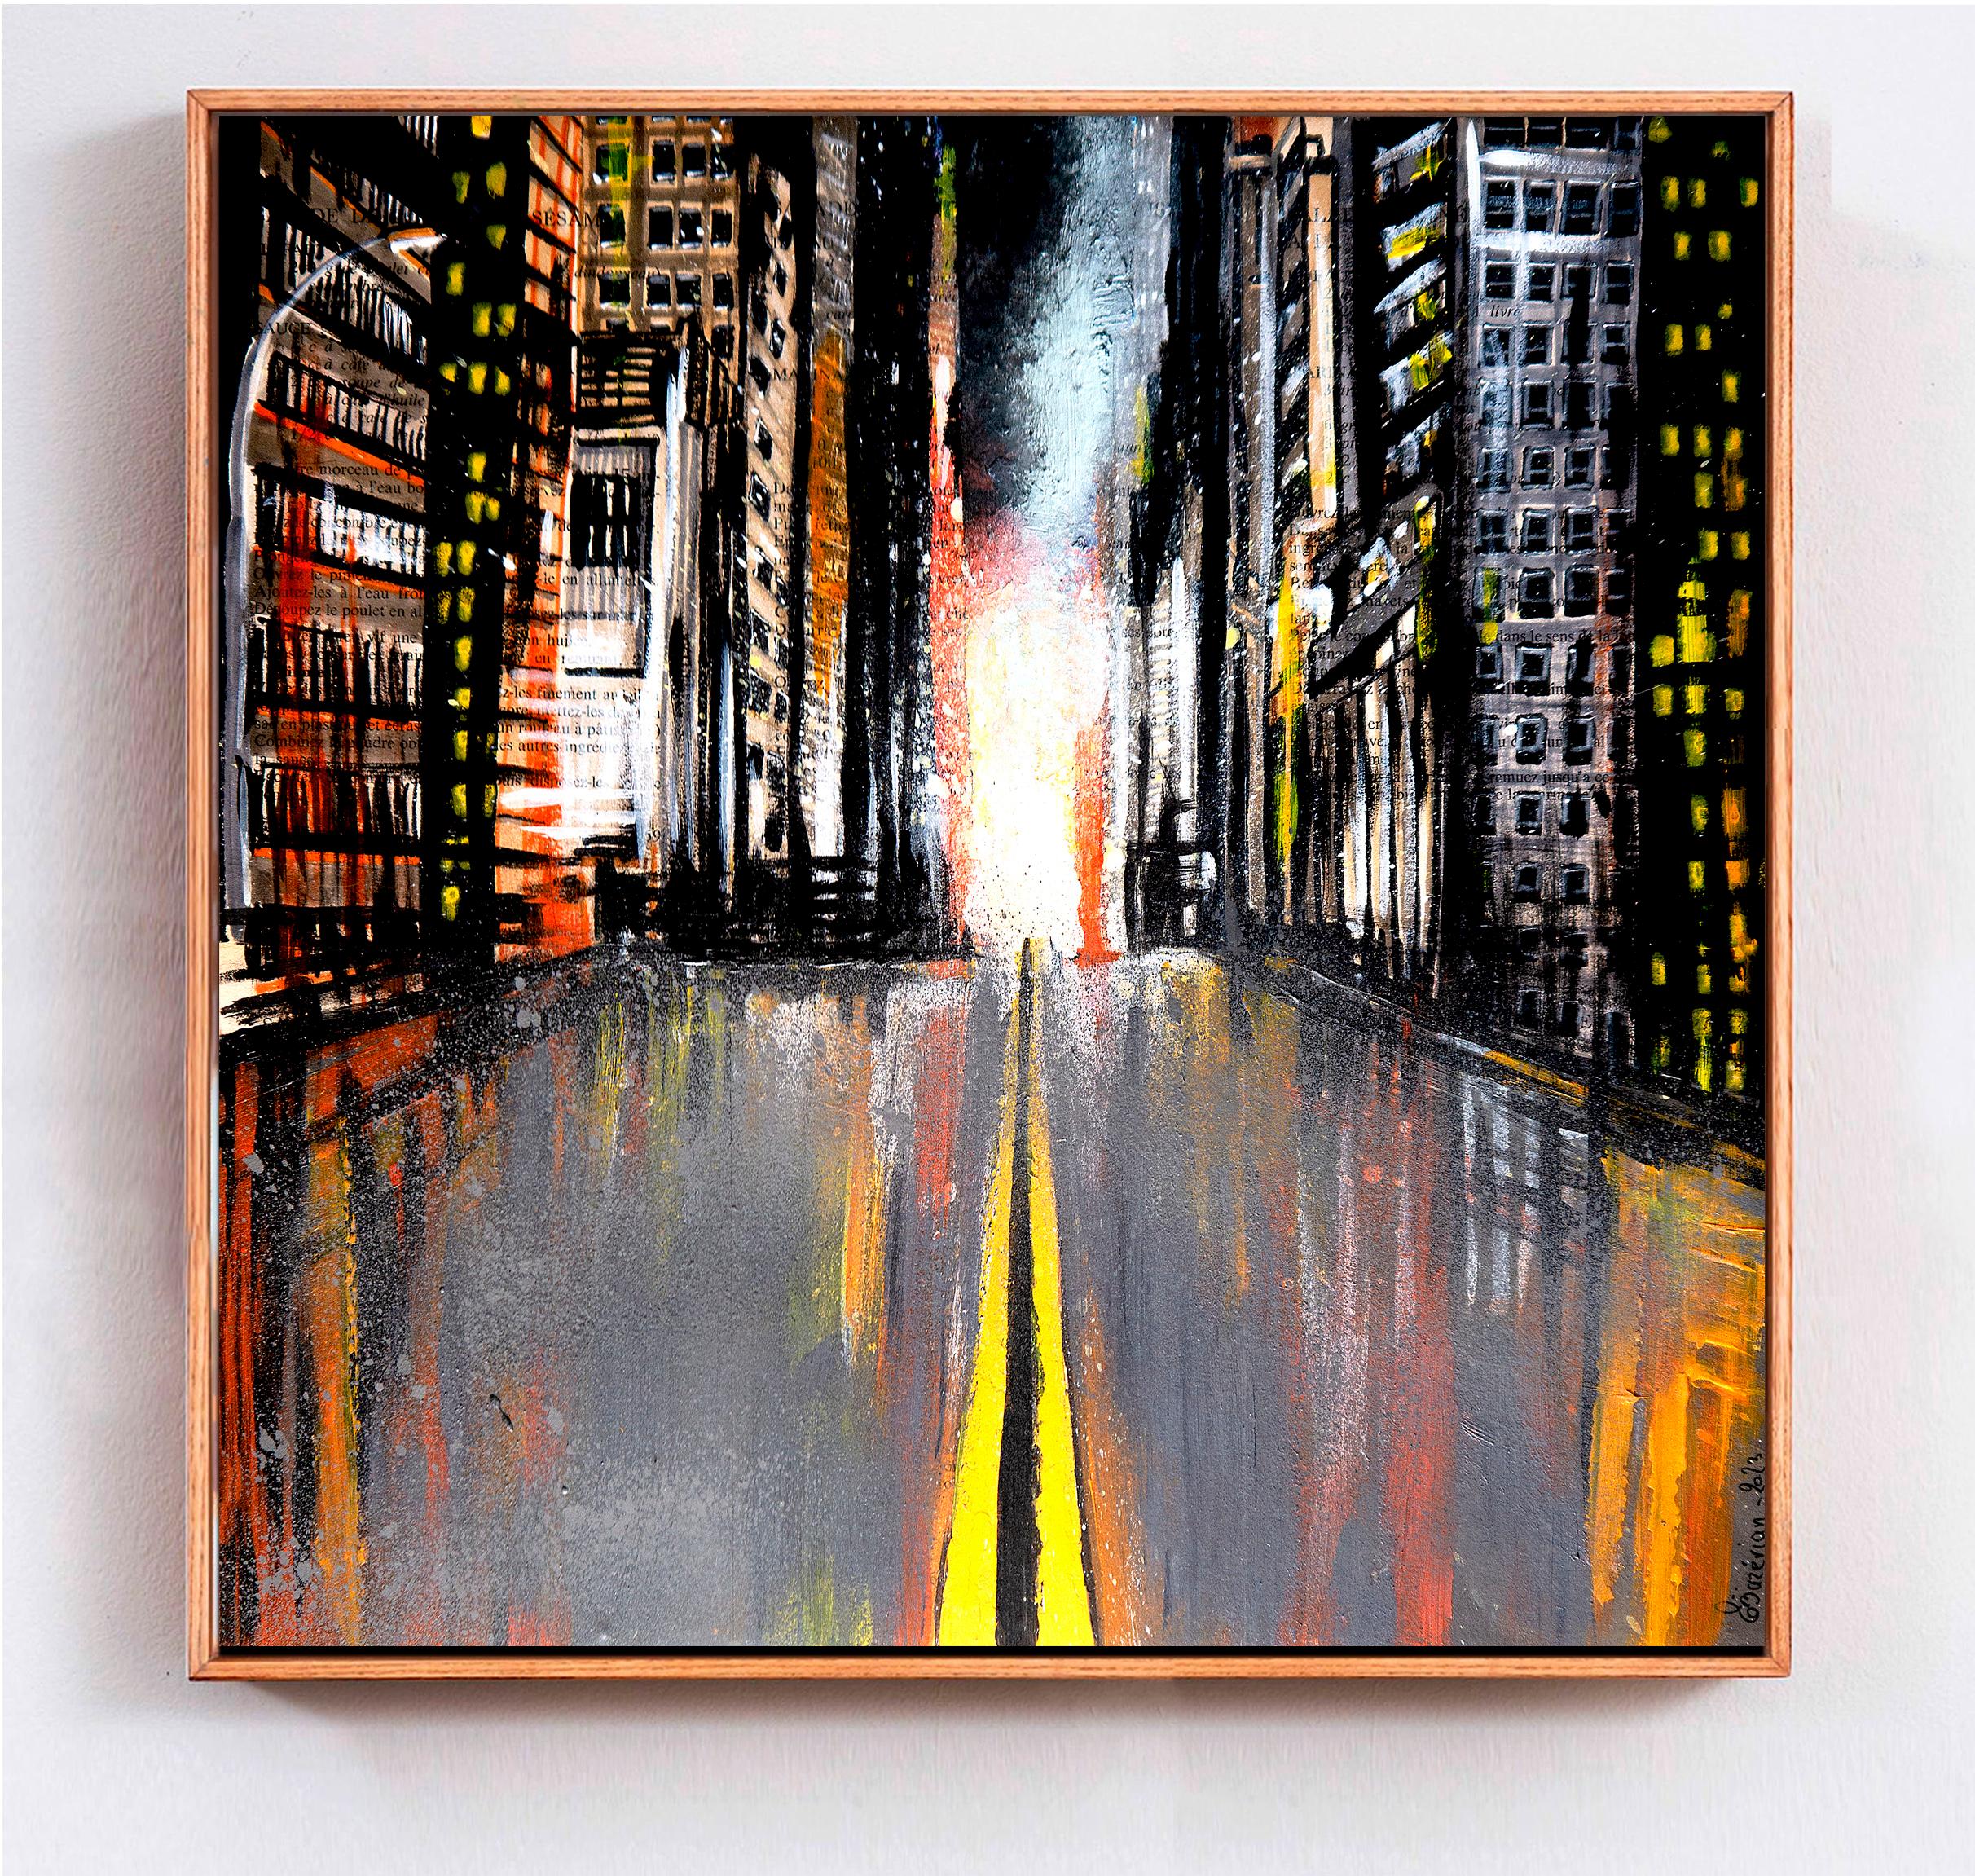 French School - Road Line III New York City oil Post Impressionist - Painting by Bazevian DelaCapuciniere